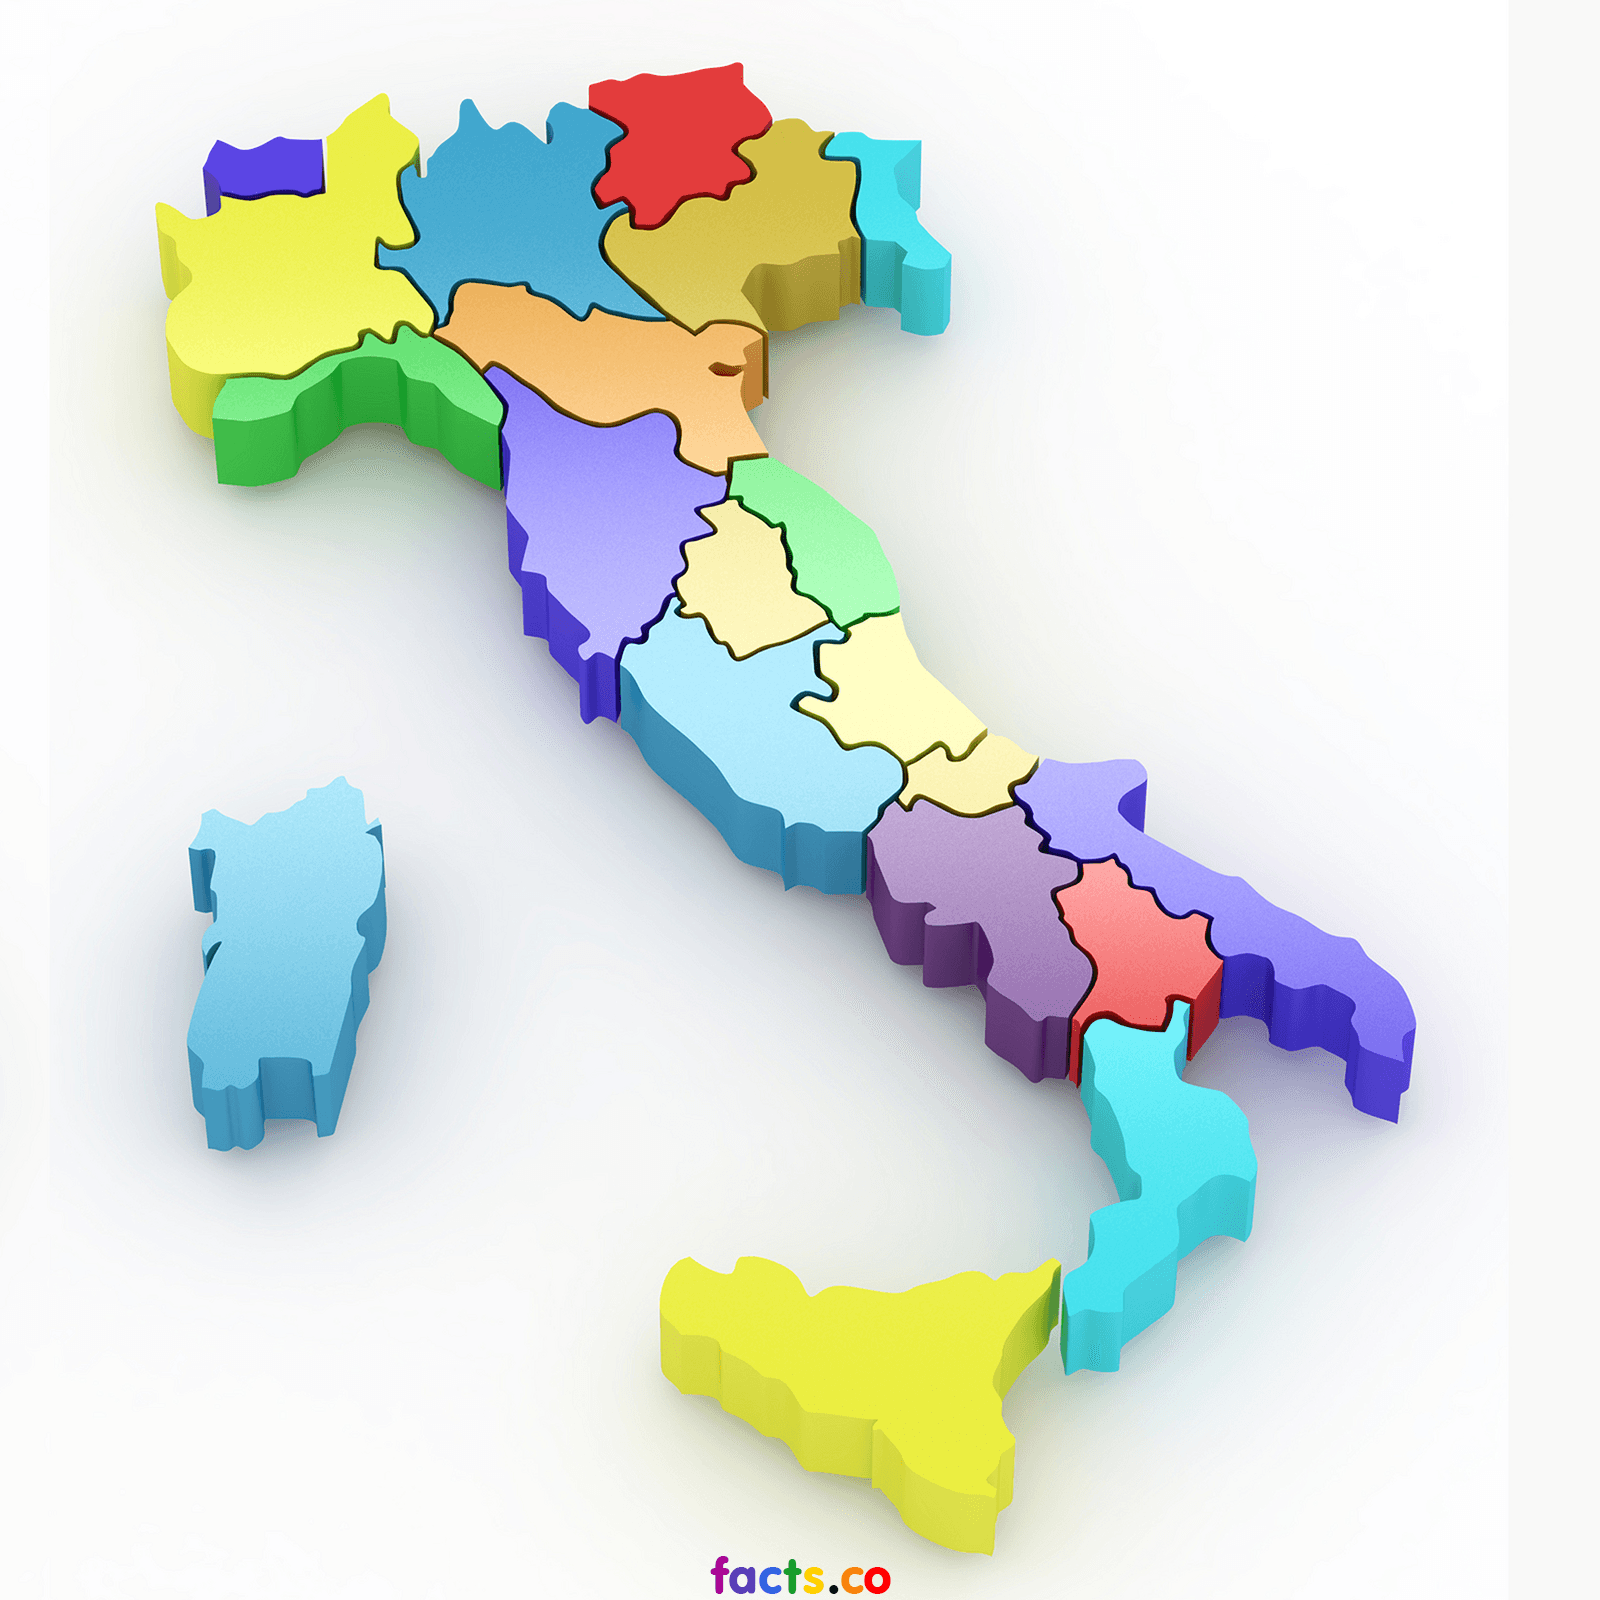 Italy Map - blank Political Italy map with cities